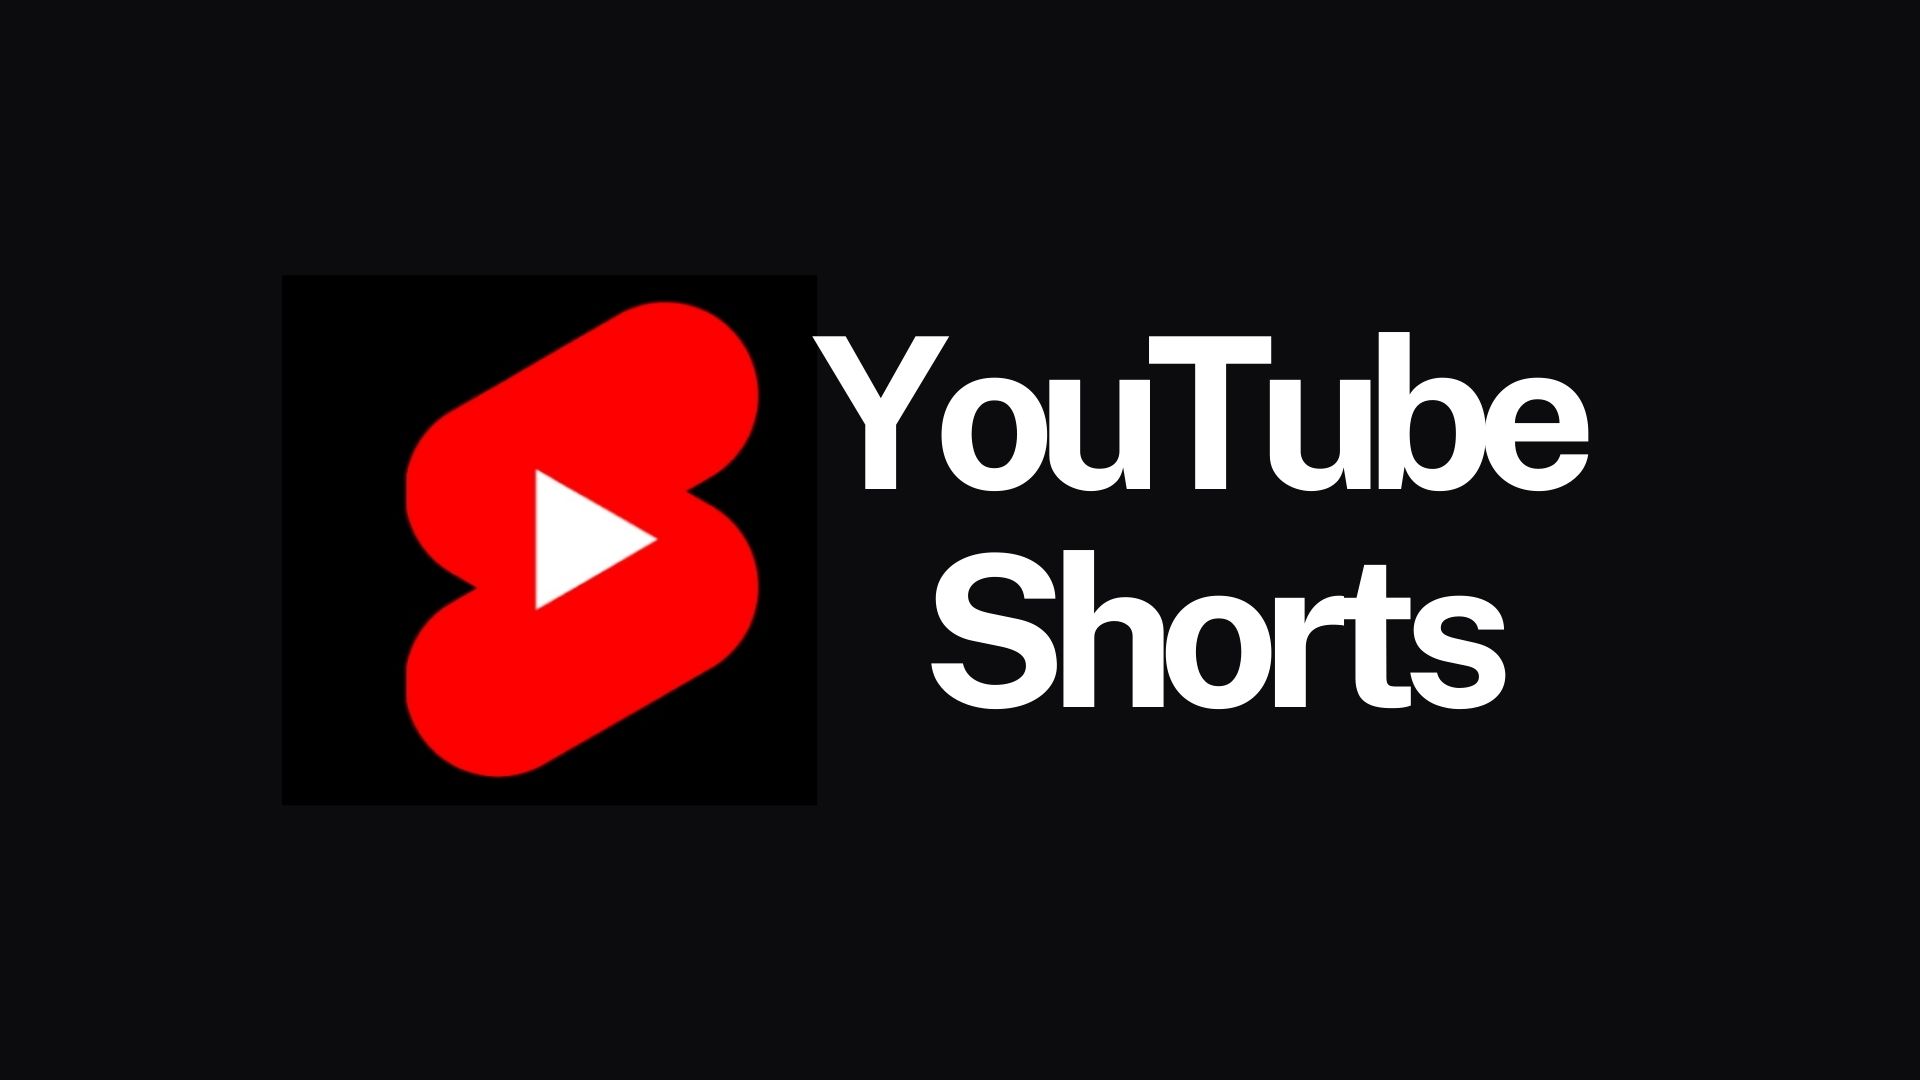 10 Incredibly Rare Diseases Youtube Shorts Downloader Without Watermark